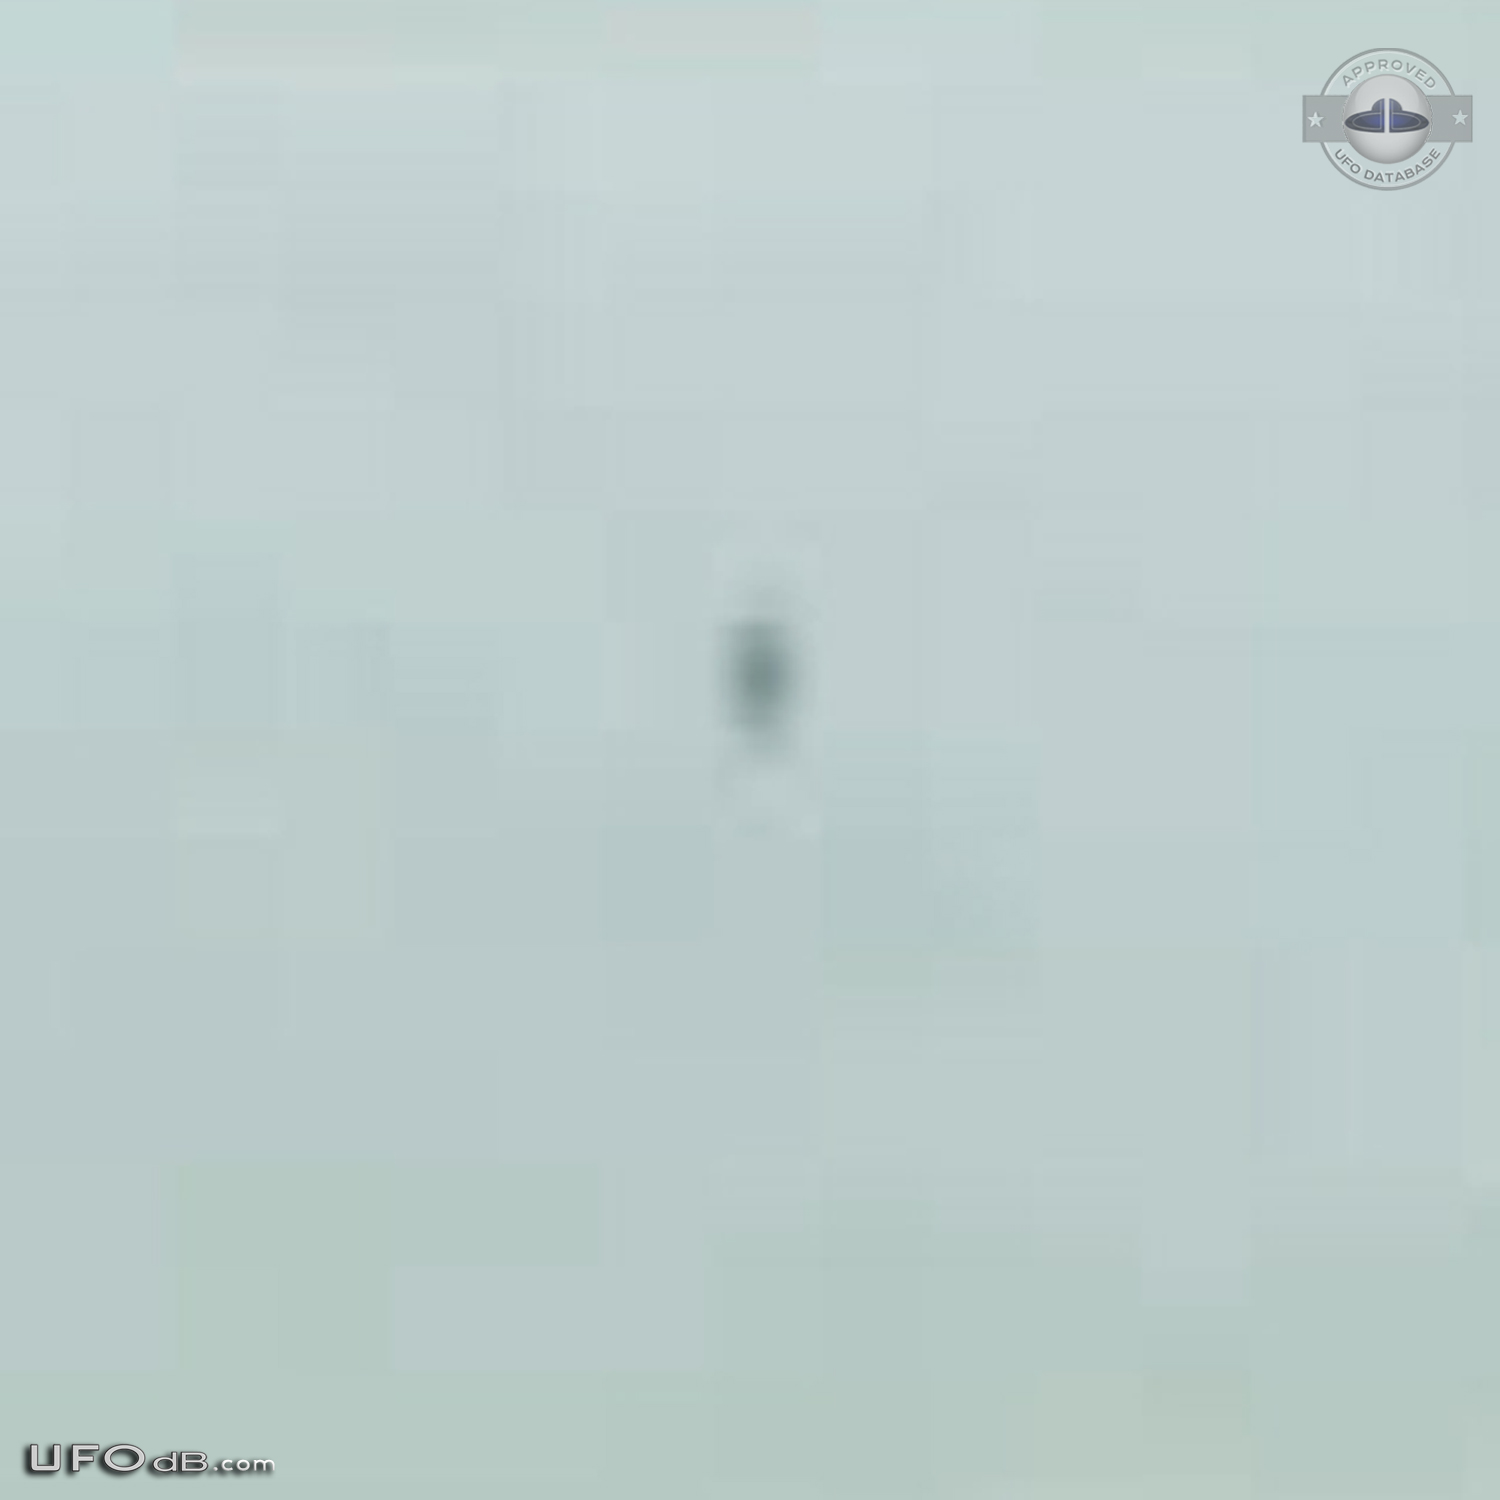 Probe ufo sighting caught on picture in Tokyo, Japan - January 2012 UFO Picture #410-5